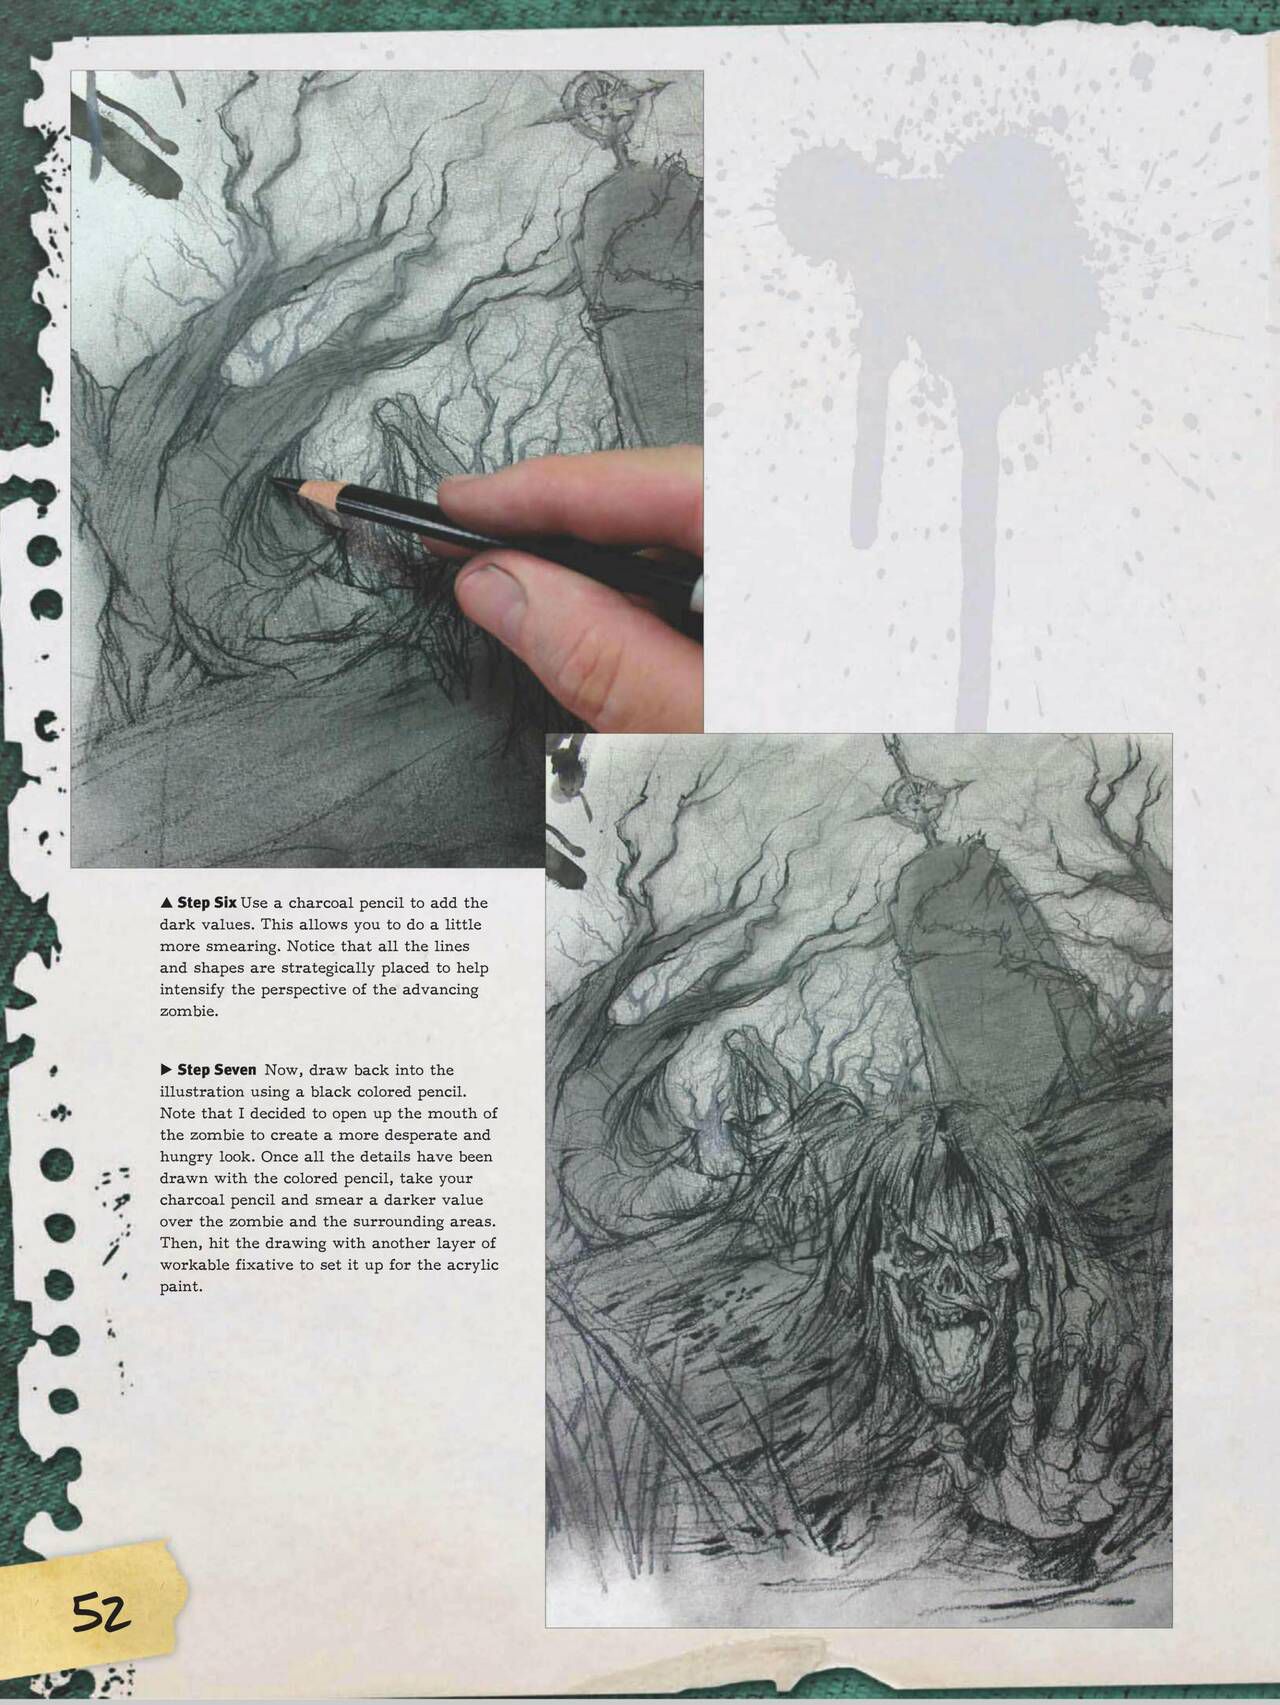 How to Draw Zombies: Discover the secrets to drawing, painting, and illustrating the undead 僵尸描绘集 53